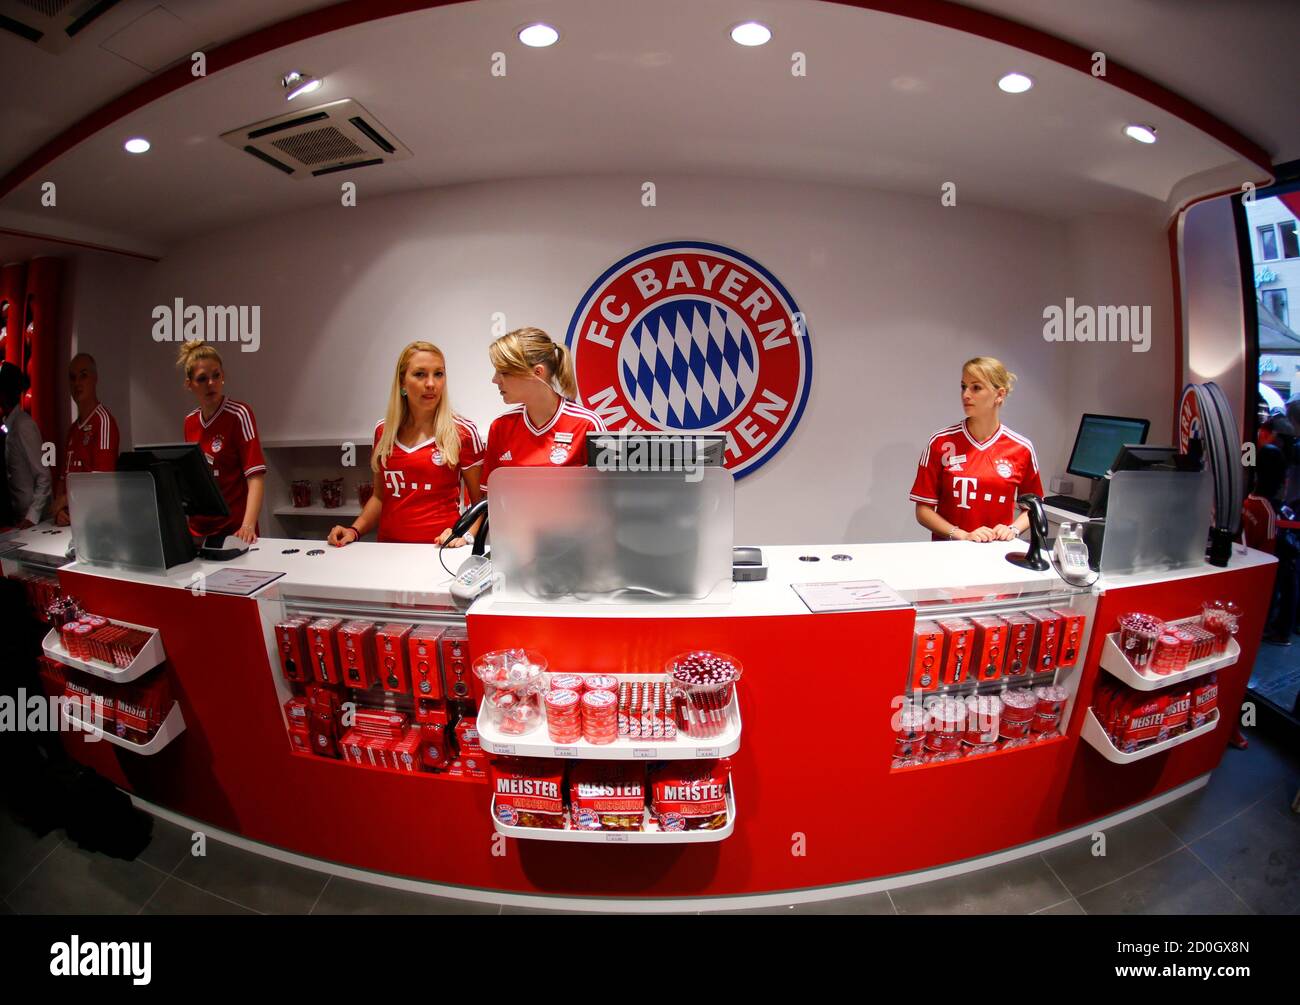 Fc Bayern Munich Fan High Resolution Stock Photography and Images - Alamy